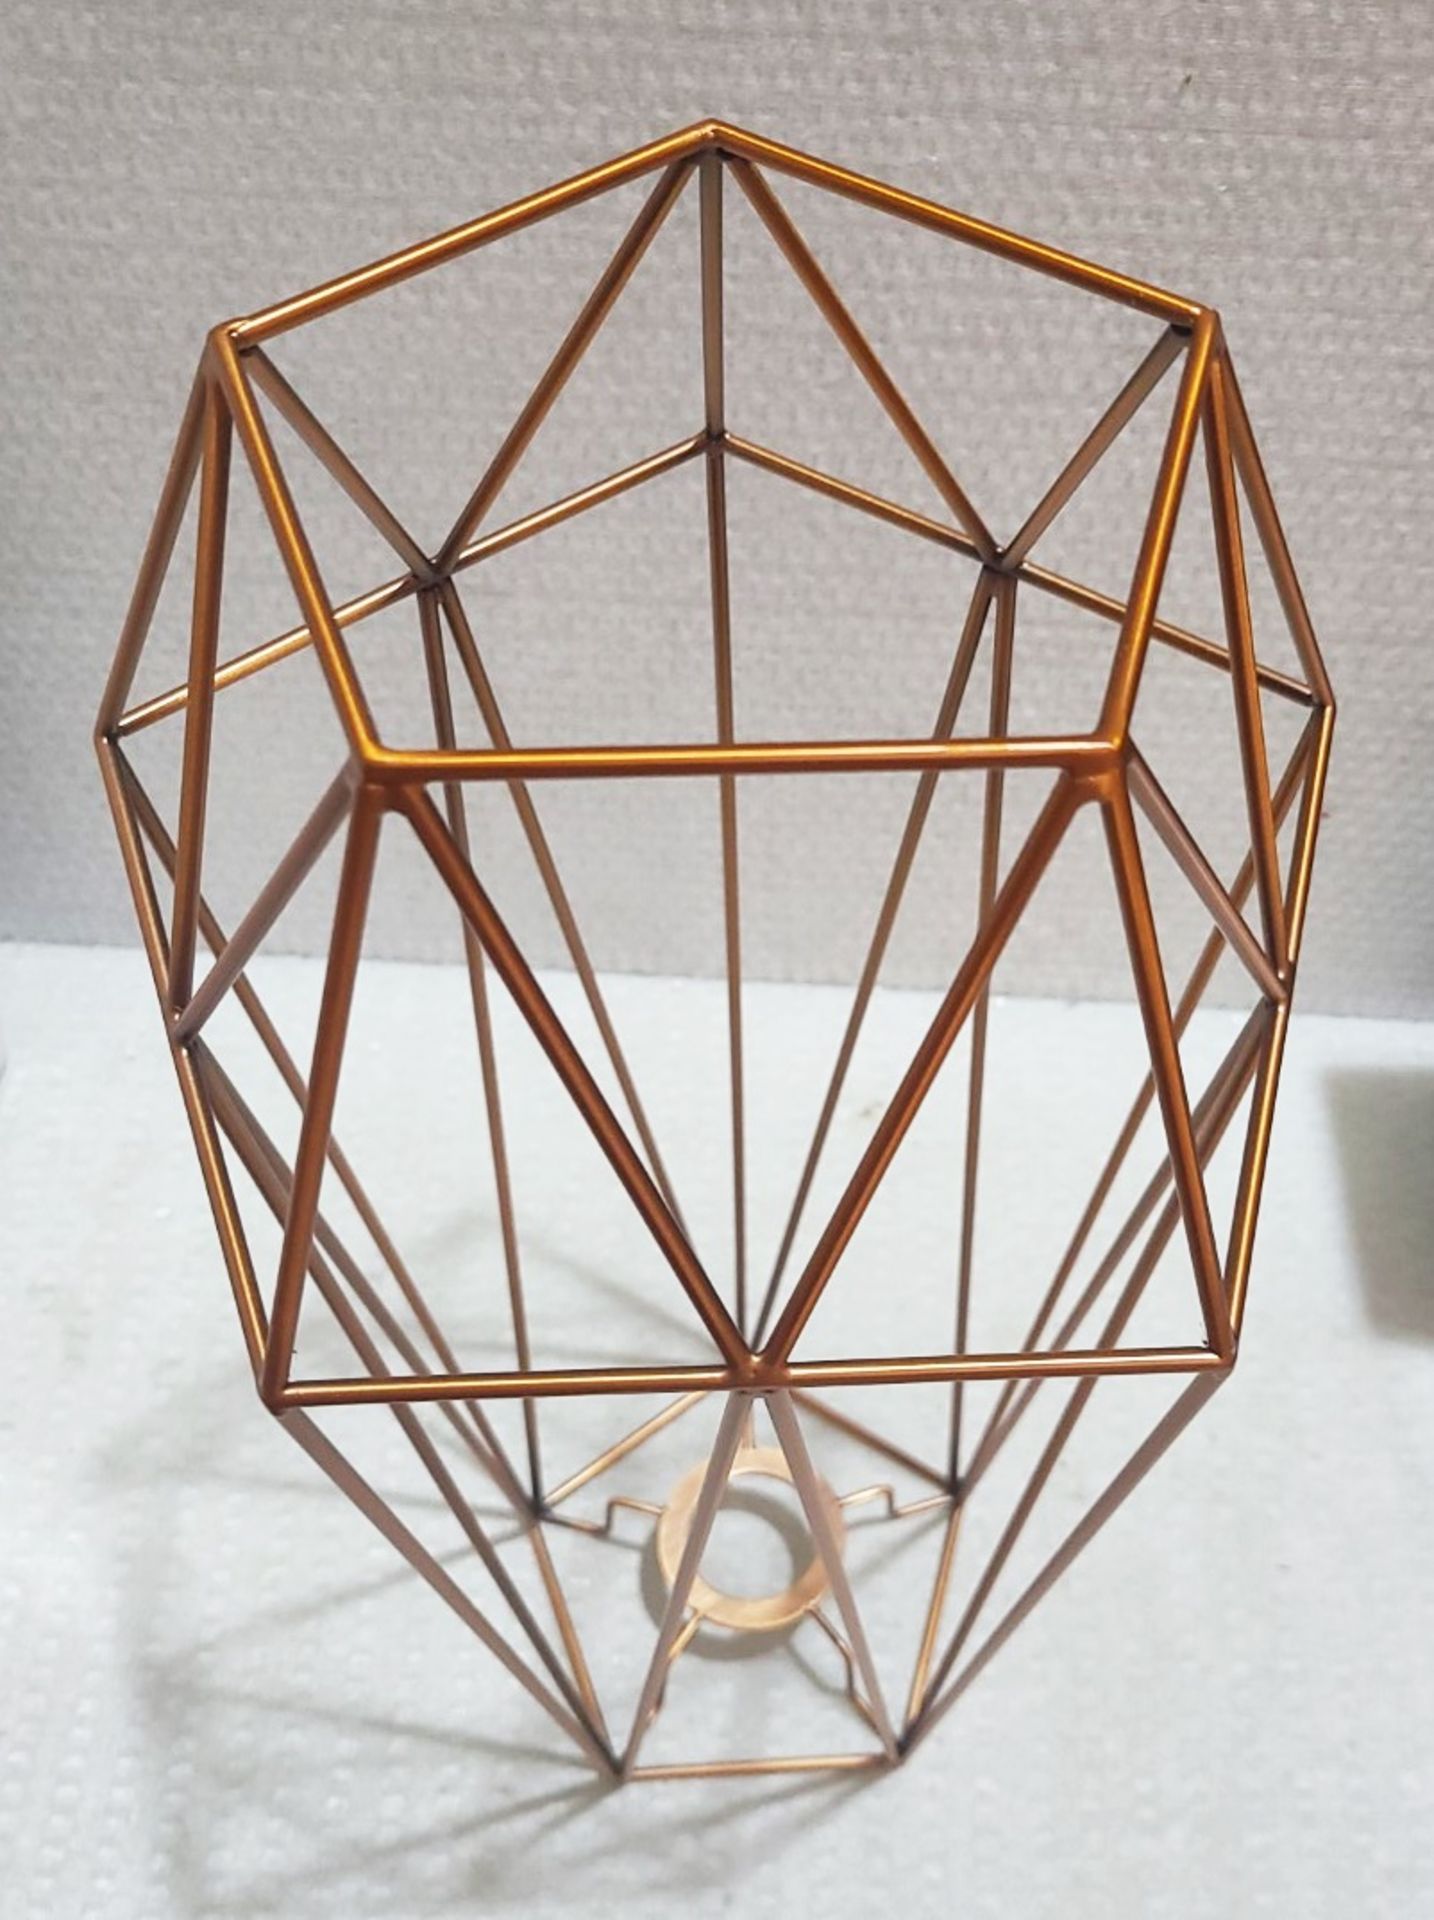 1 x CHELSOM Diamond Table Lamp Copper Metal Cage Shade Geometric Style - Image 2 of 4